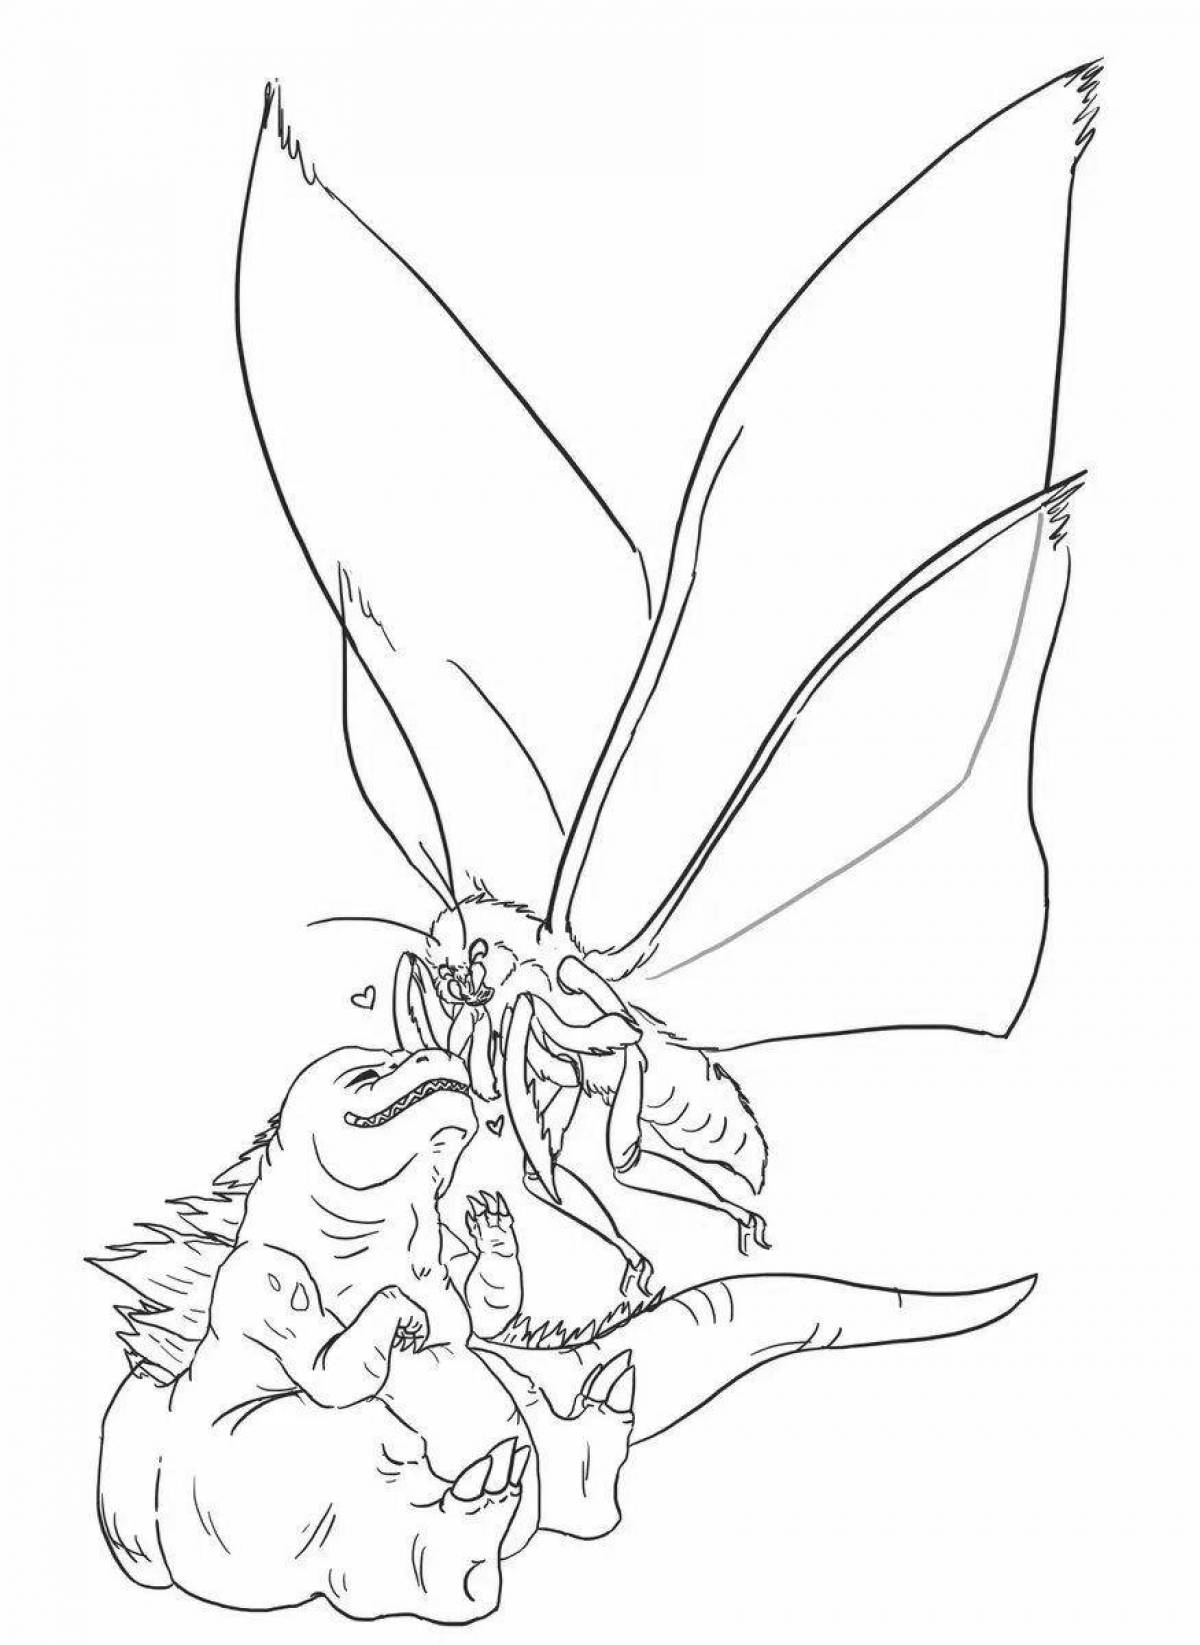 Amazing Mothra Butterfly Coloring Page